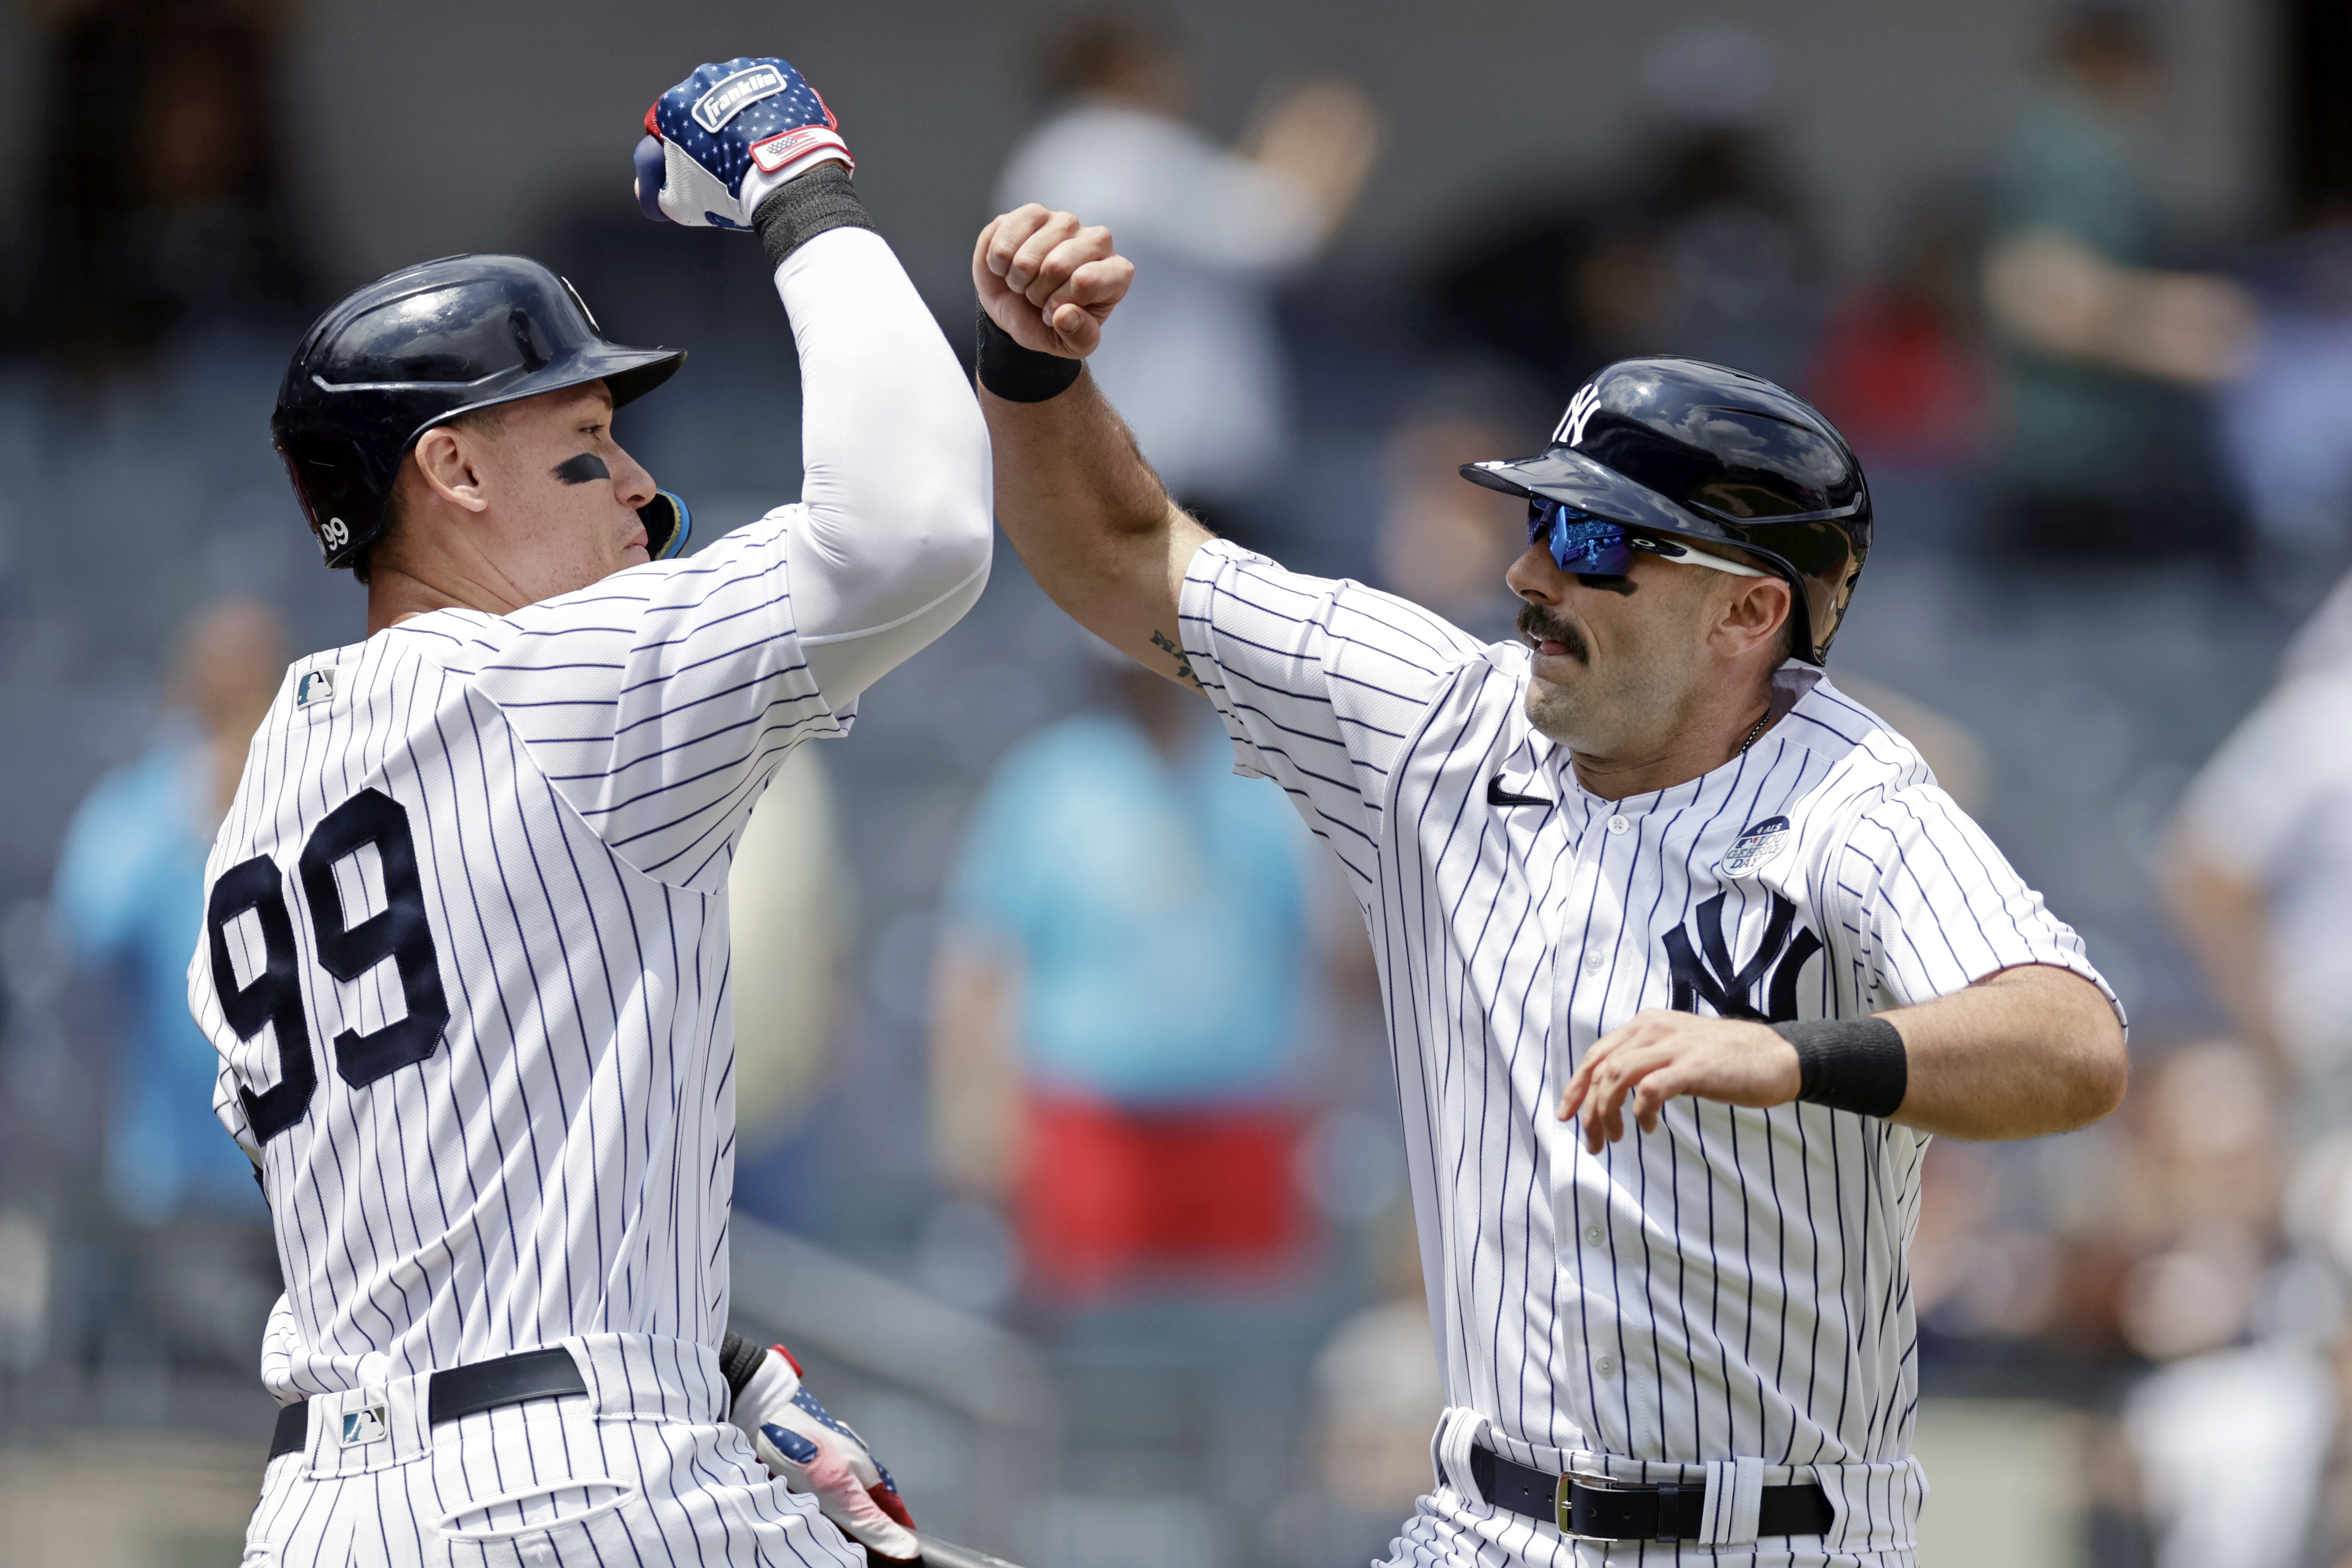 How to Watch the Tigers vs. Yankees Game: Streaming & TV Info